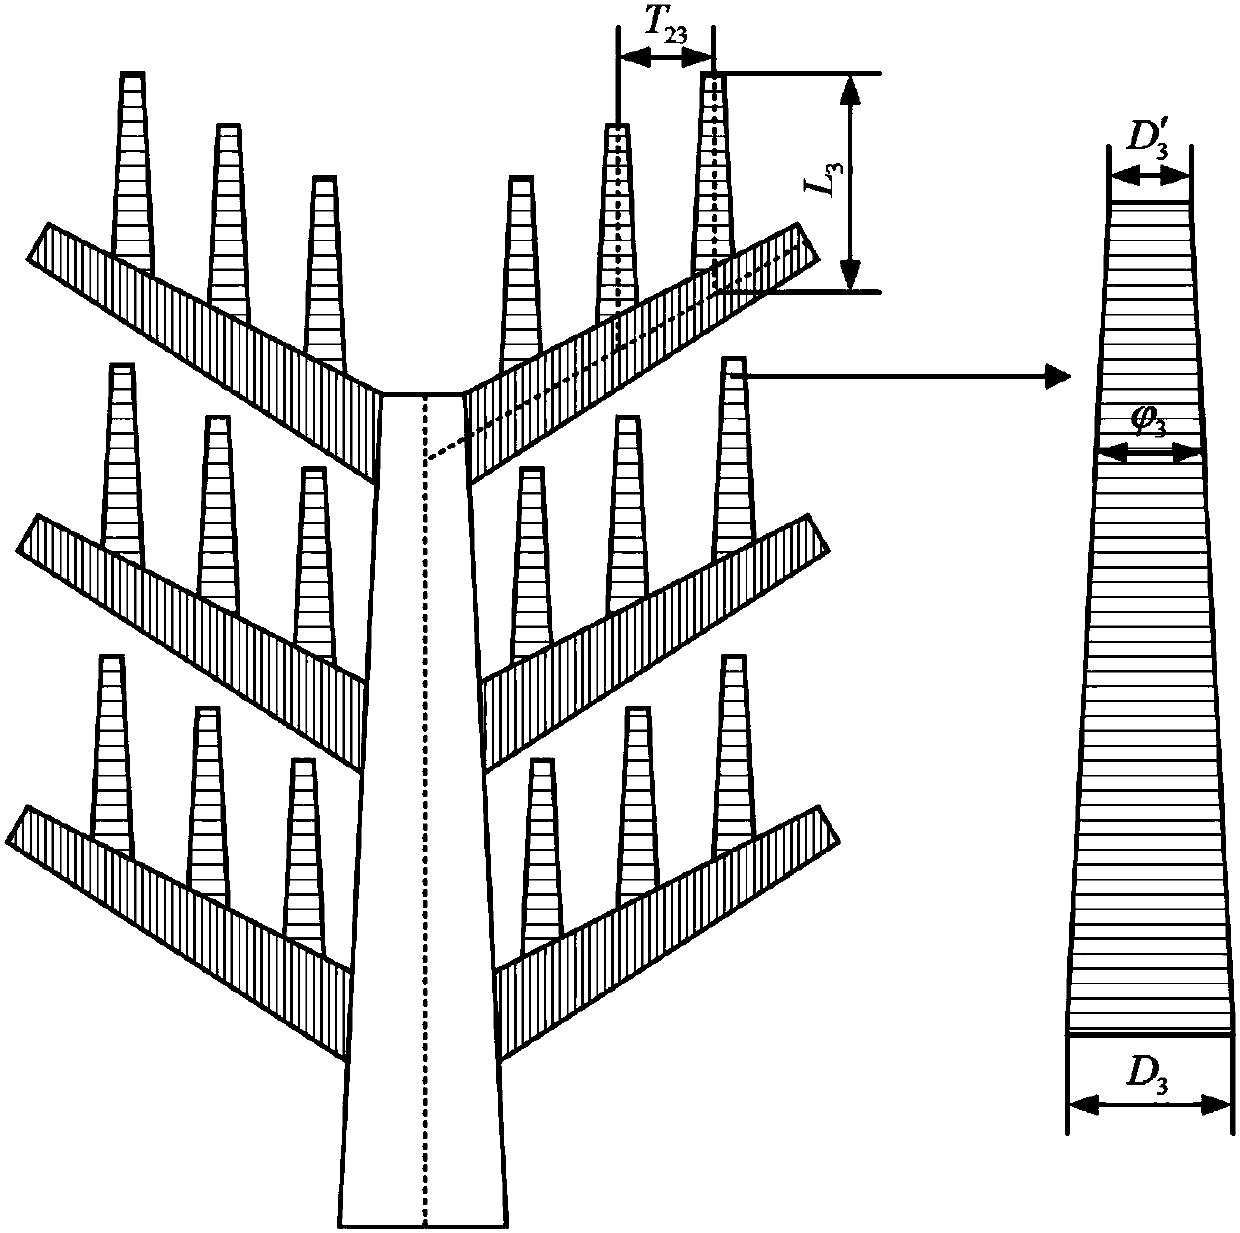 Wedge-shaped fractal based tree-from spontaneous orienting, transporting and collecting runner structure